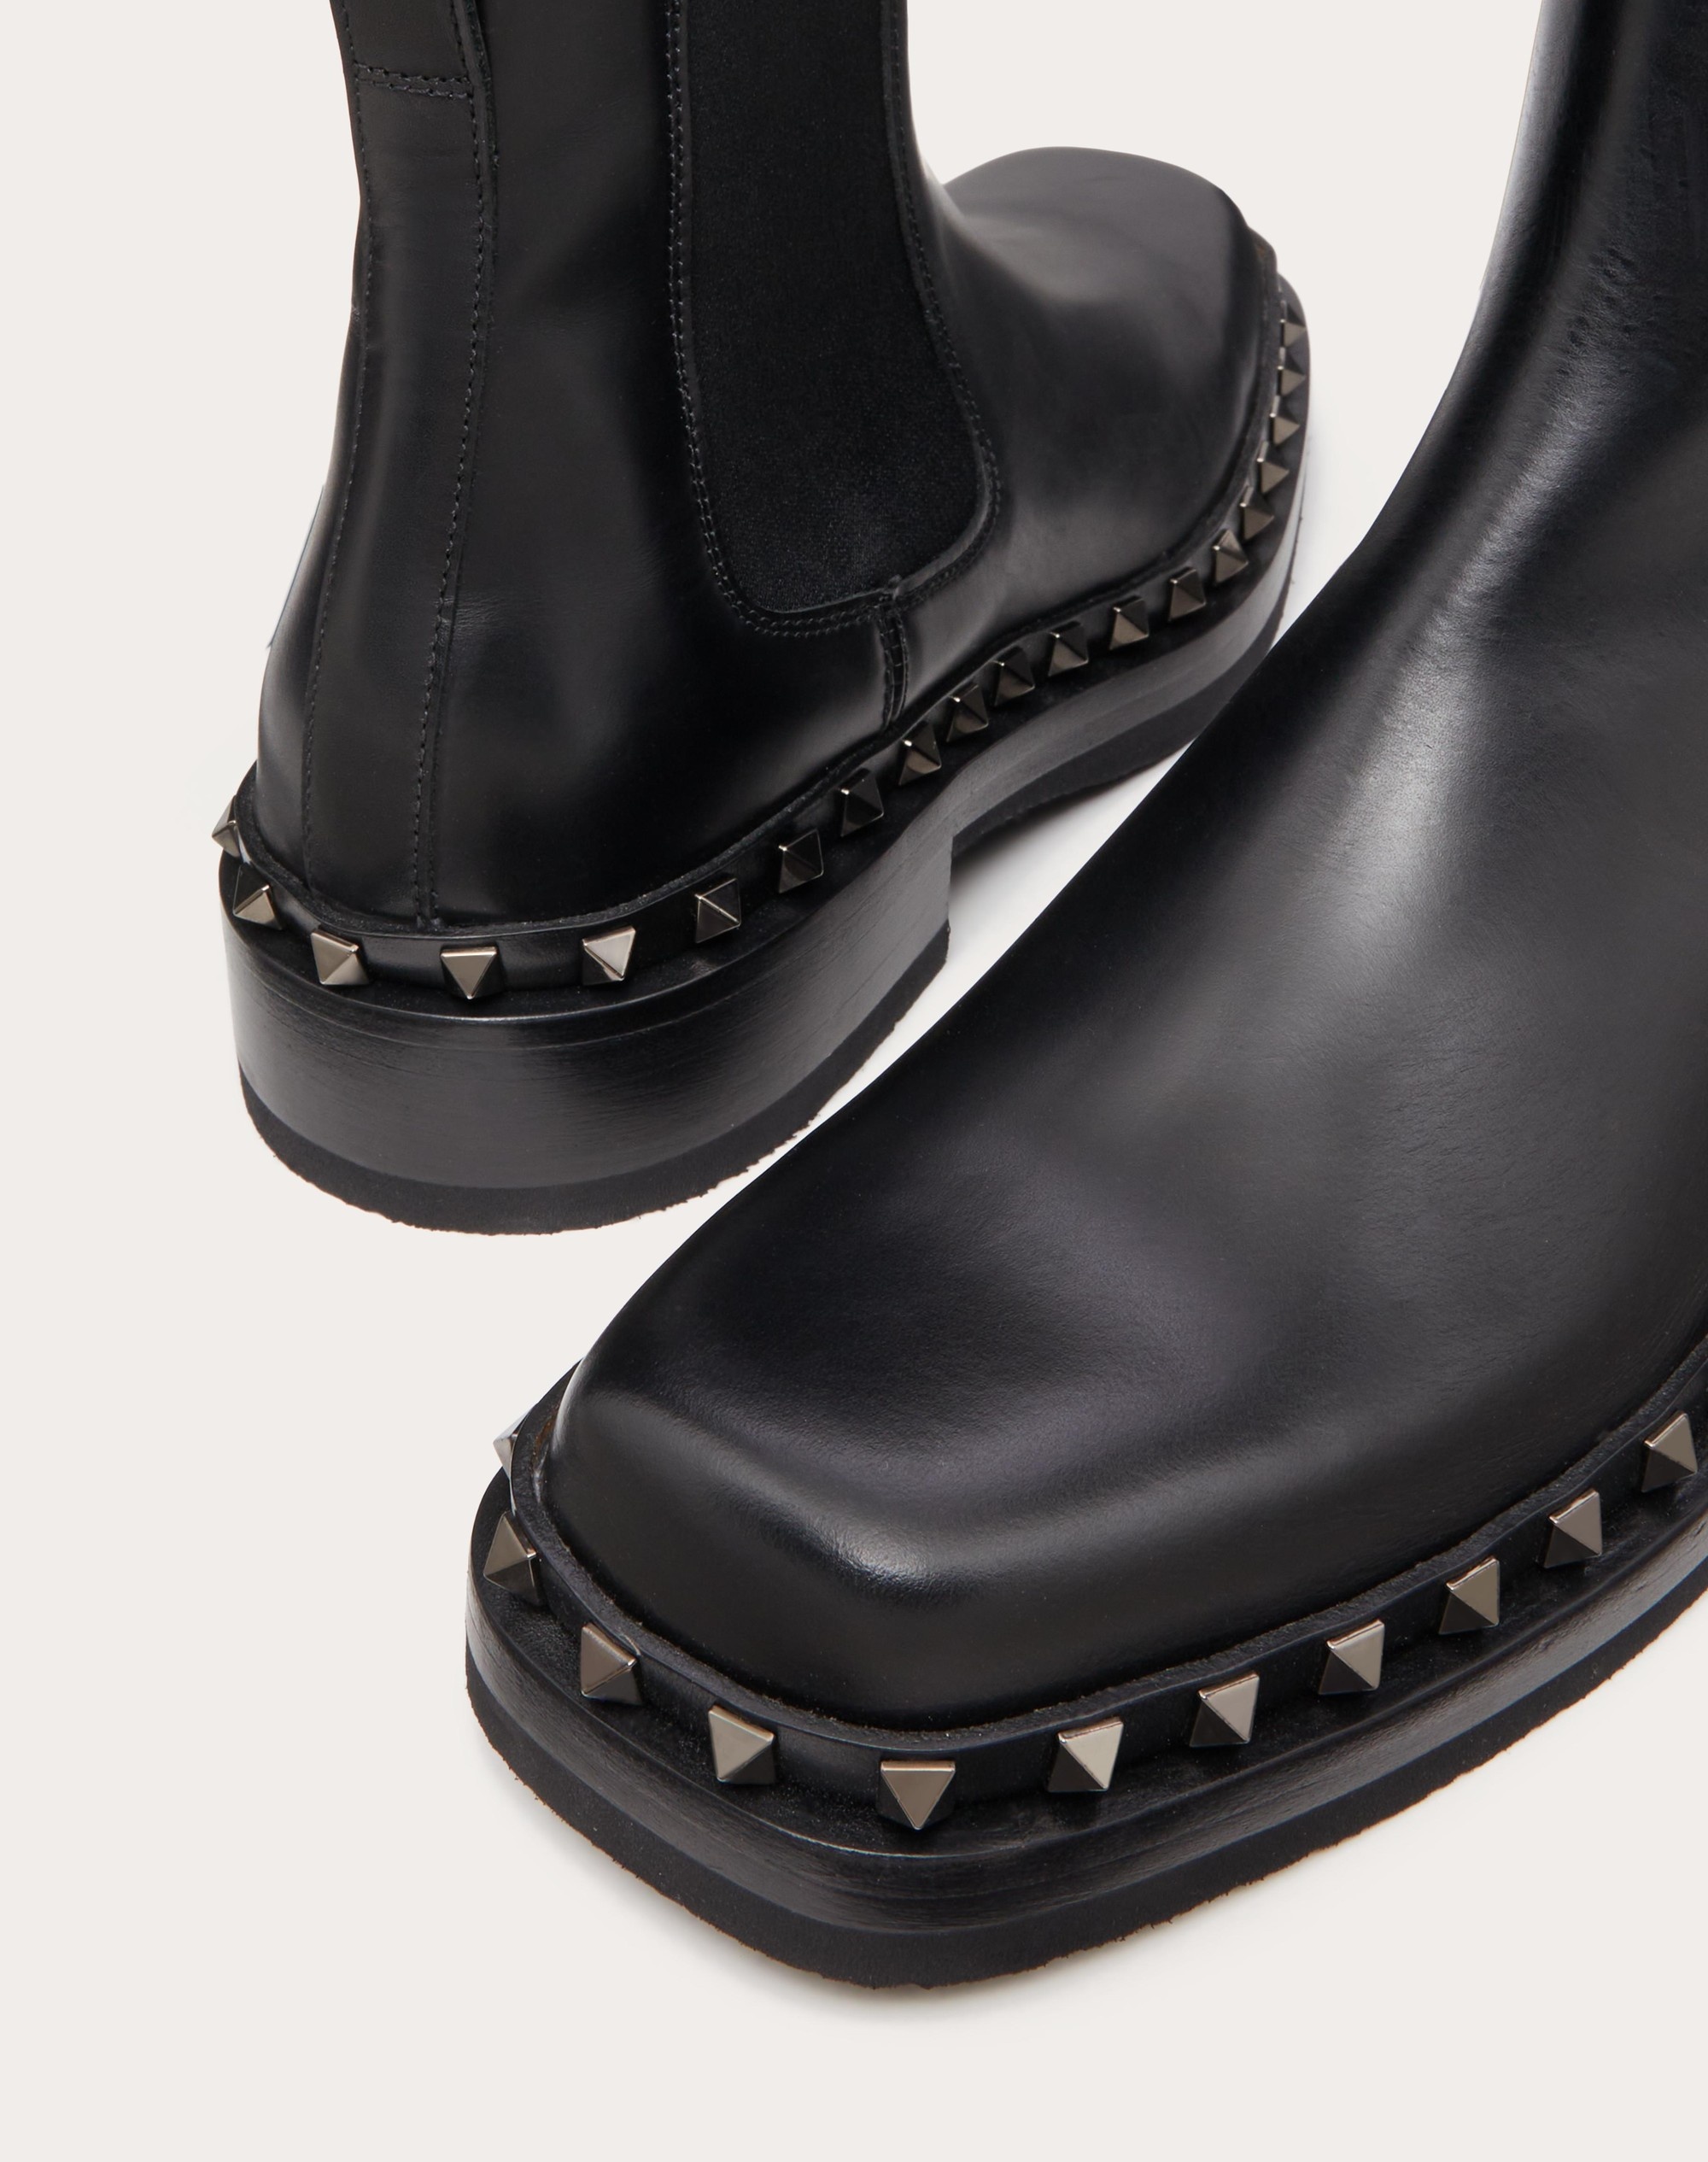 M-WAY ROCKSTUD ANKLE BOOT IN CALFSKIN LEATHER - 5